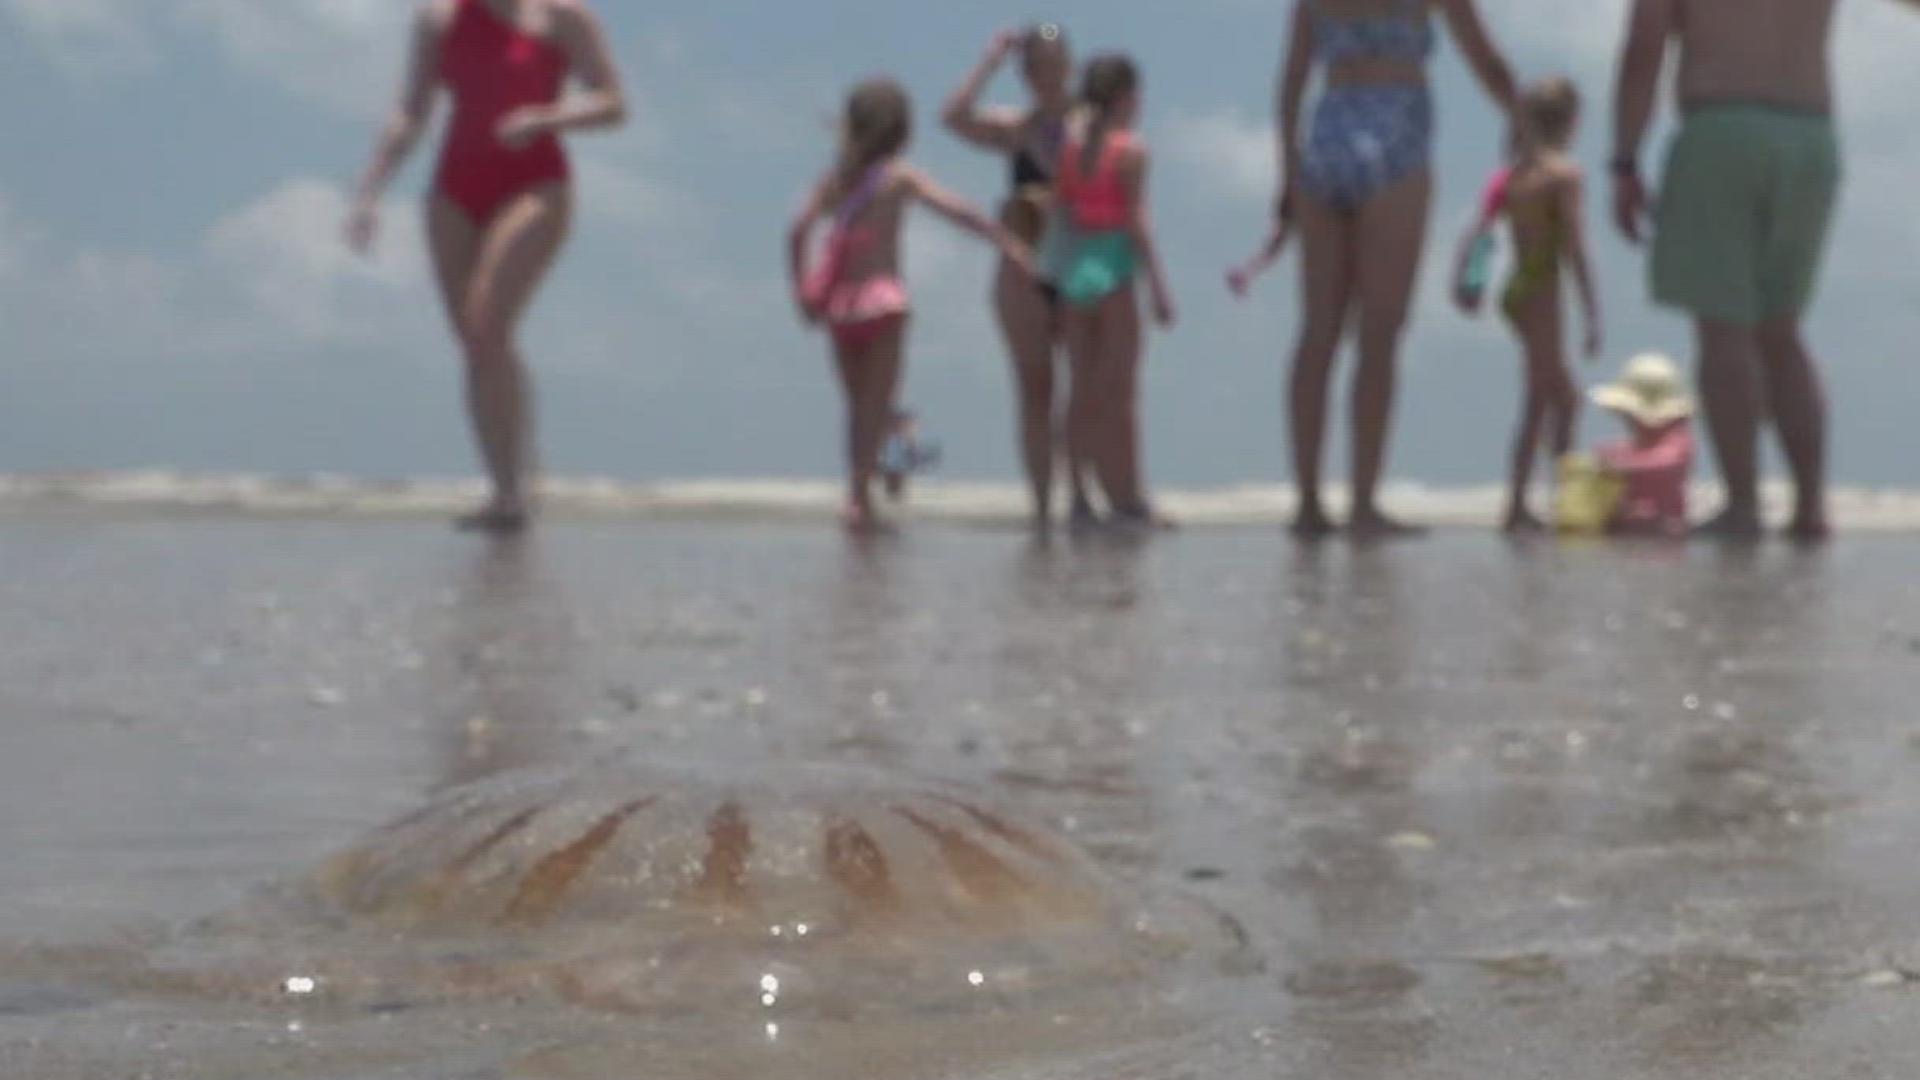 Officials say there's a number of reasons why the jellyfish are here in such high numbers, like food source, warm temperatures, and even Tropical Storm Alberto.